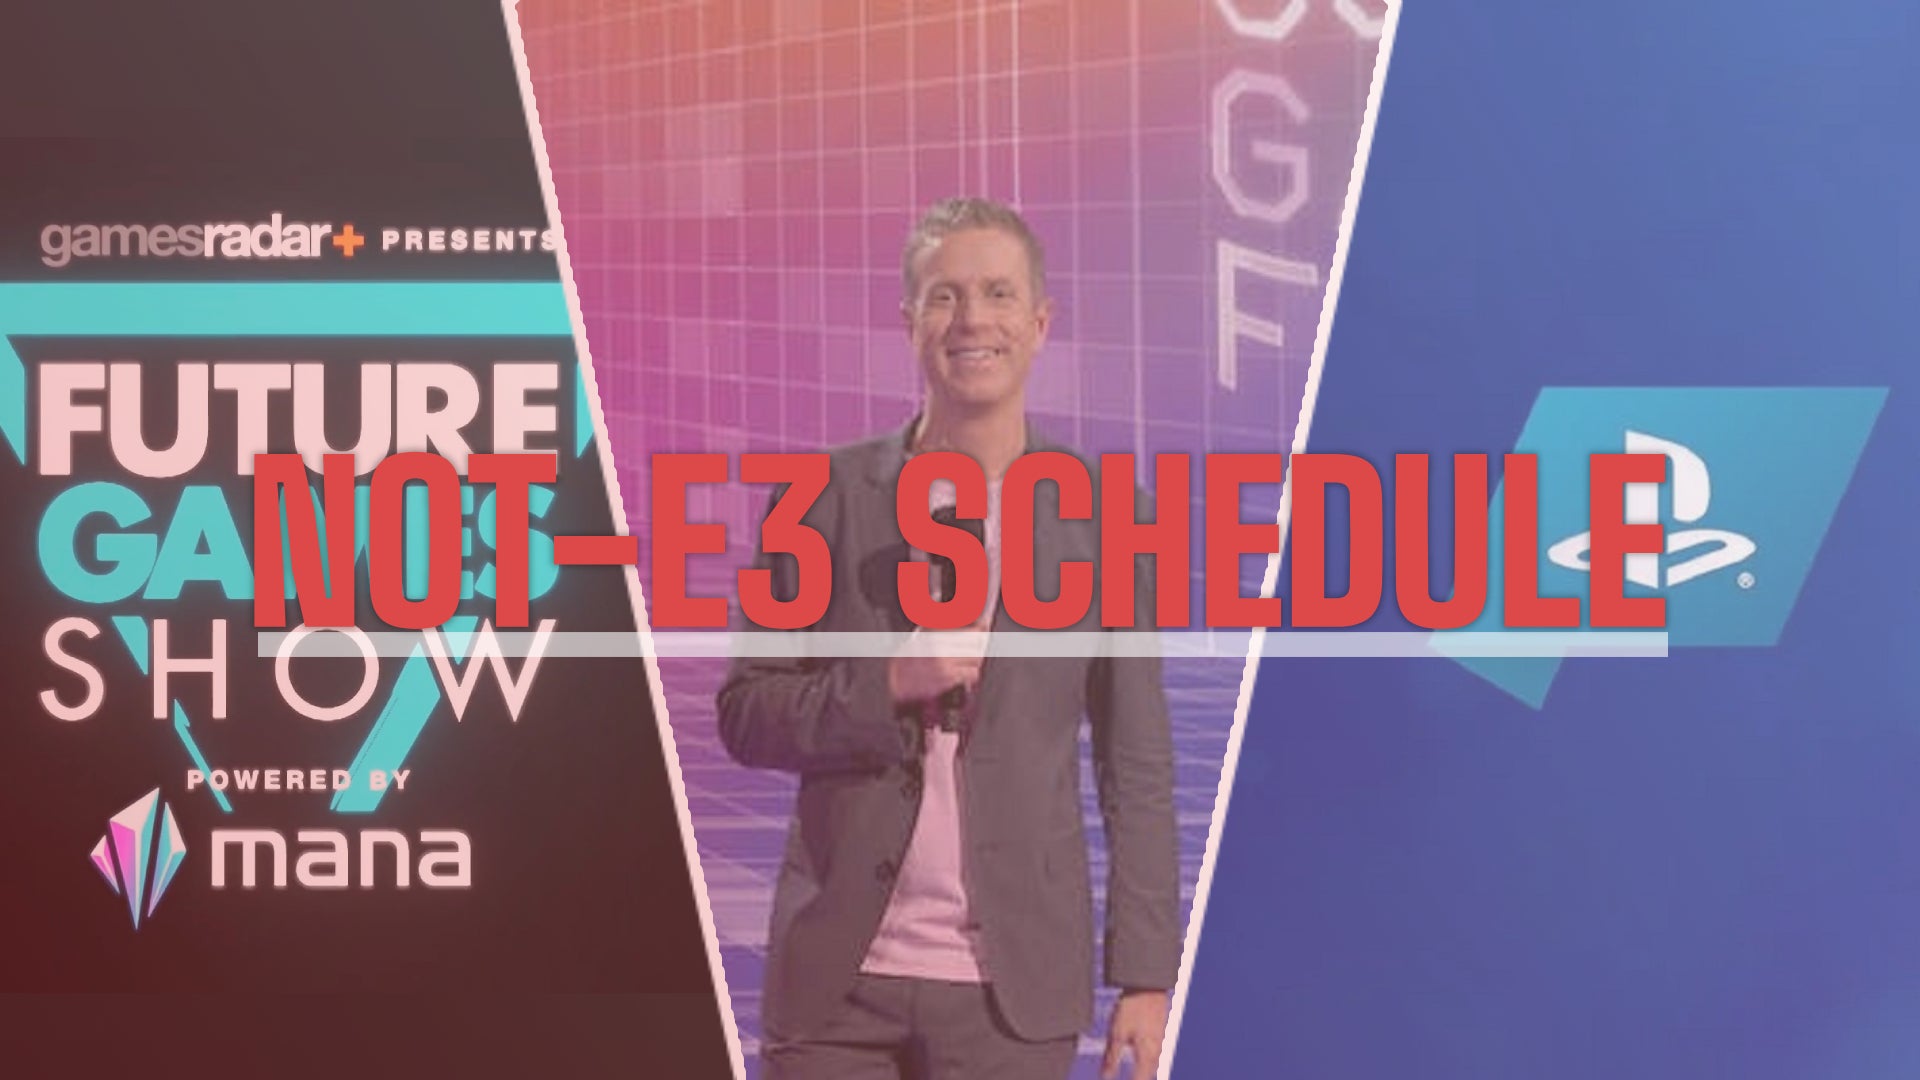 Header for VG247 not-E3 schedule article.